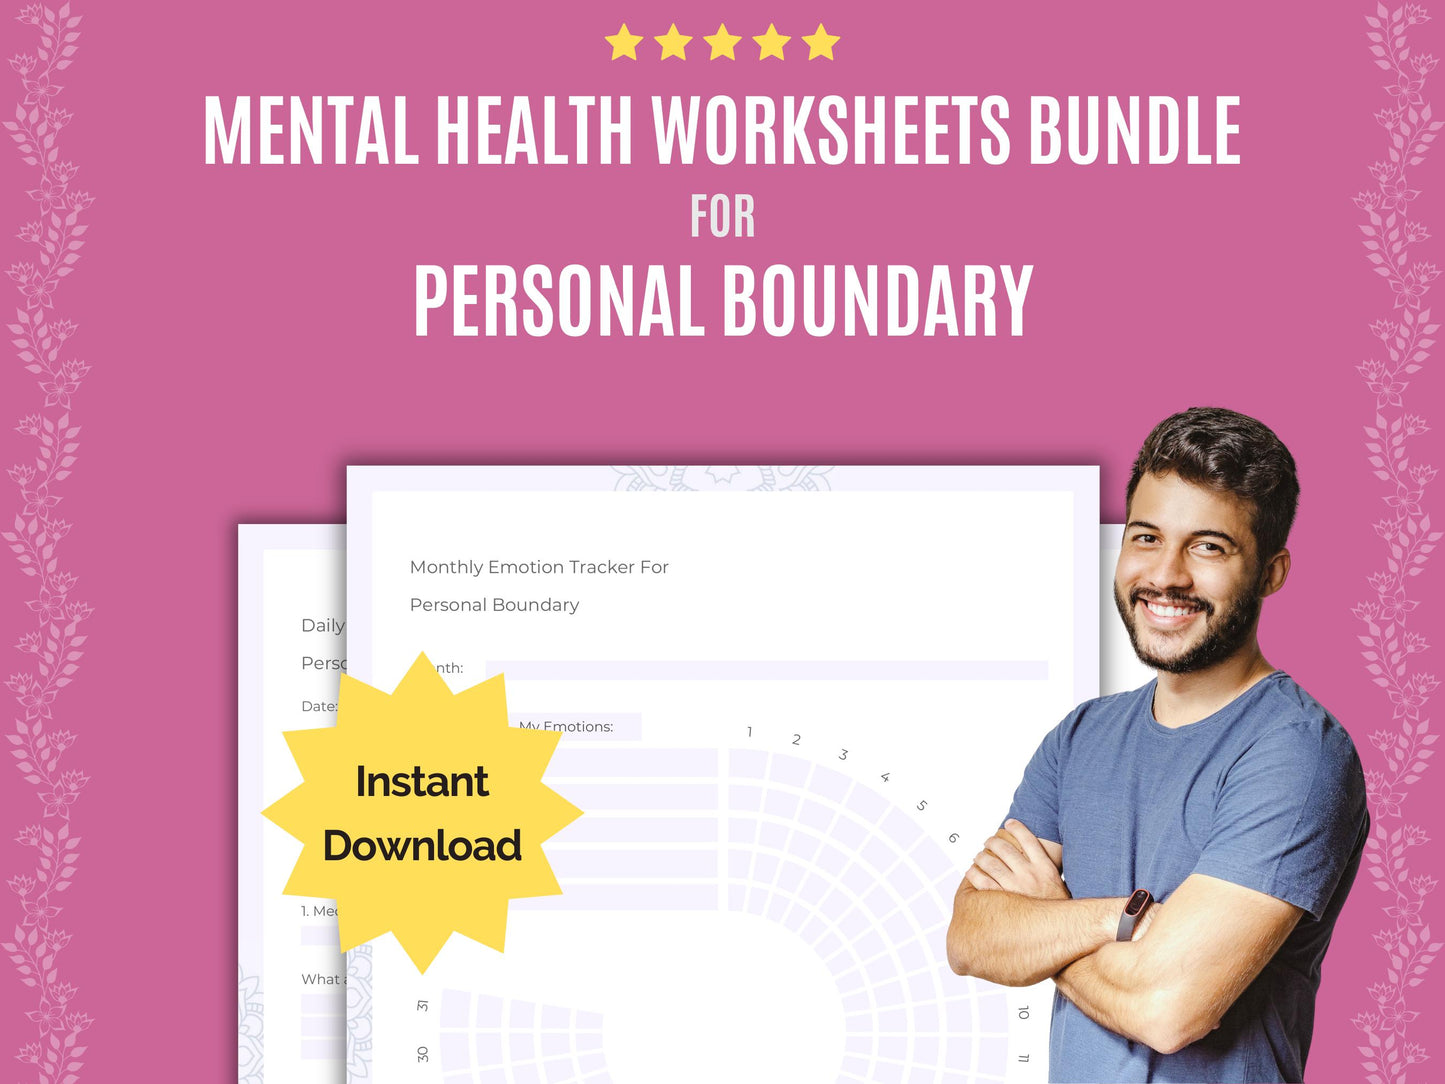 Personal Journaling, Personal Cheat Sheet, Personal Therapy, Goal Setting, Personal Resources, Boundary, Personal Templates, Personal Counseling, Personal Mental Health, Personal Journals, Personal Notes, Personal Planners, Personal Workbooks, Personal Tools